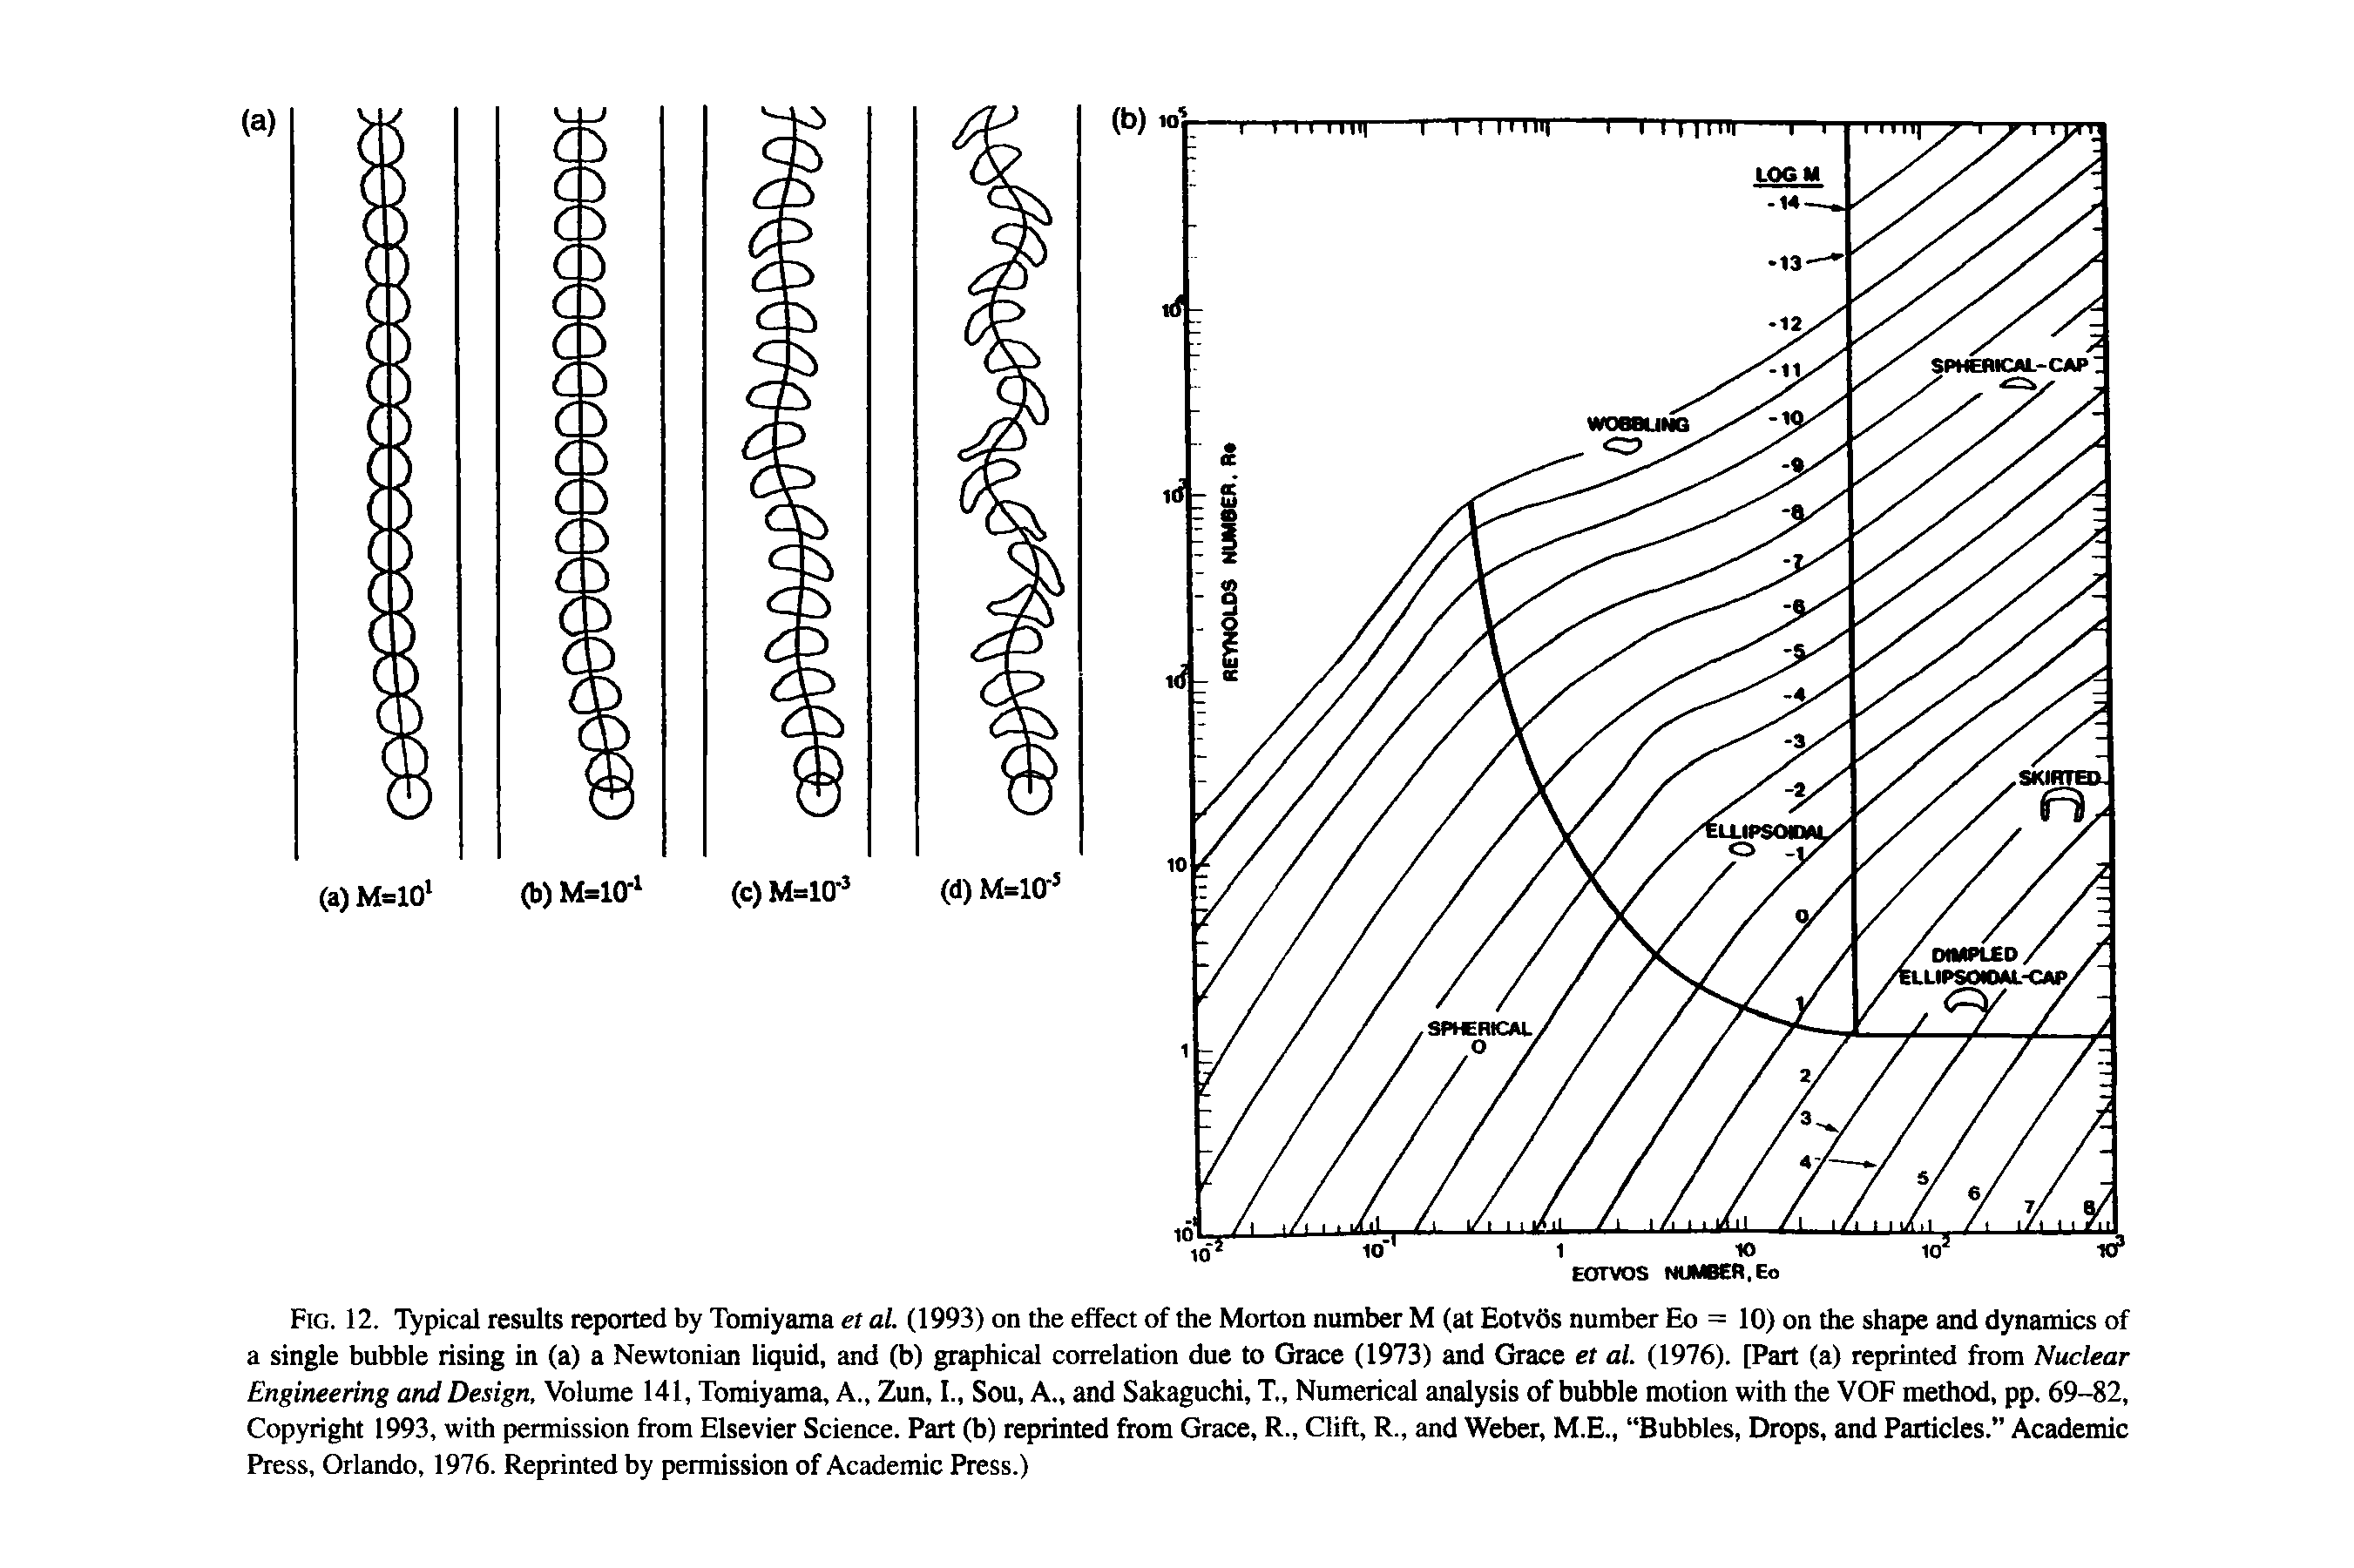 Fig. 12. Typical results reported by Tomiyama ei al. (1993) on the effect of the Morton number M (atEotvSs number Eo = 10) on the shape and dynamics of a single bubble rising in (a) a Newtonian liquid, and (b) graphical correlation due to Grace (1973) and Grace et al. (1976). [Part (a) reprinted from Nuclear Engineering and Design, Volume 141, Tomiyama, A., Zun, I., Sou, A., and Sakaguchi, T., Numerical analysis of bubble motion with the VOF method, pp. 69-82, Copyright 1993, with permission from Elsevier Science. Part (b) reprinted from Grace, R., Clift, R., and Weber, M.E., Bubbles, Drops, and Particles. Academic Press, Orlando, 1976. Reprinted by permission of Academic Press.)...